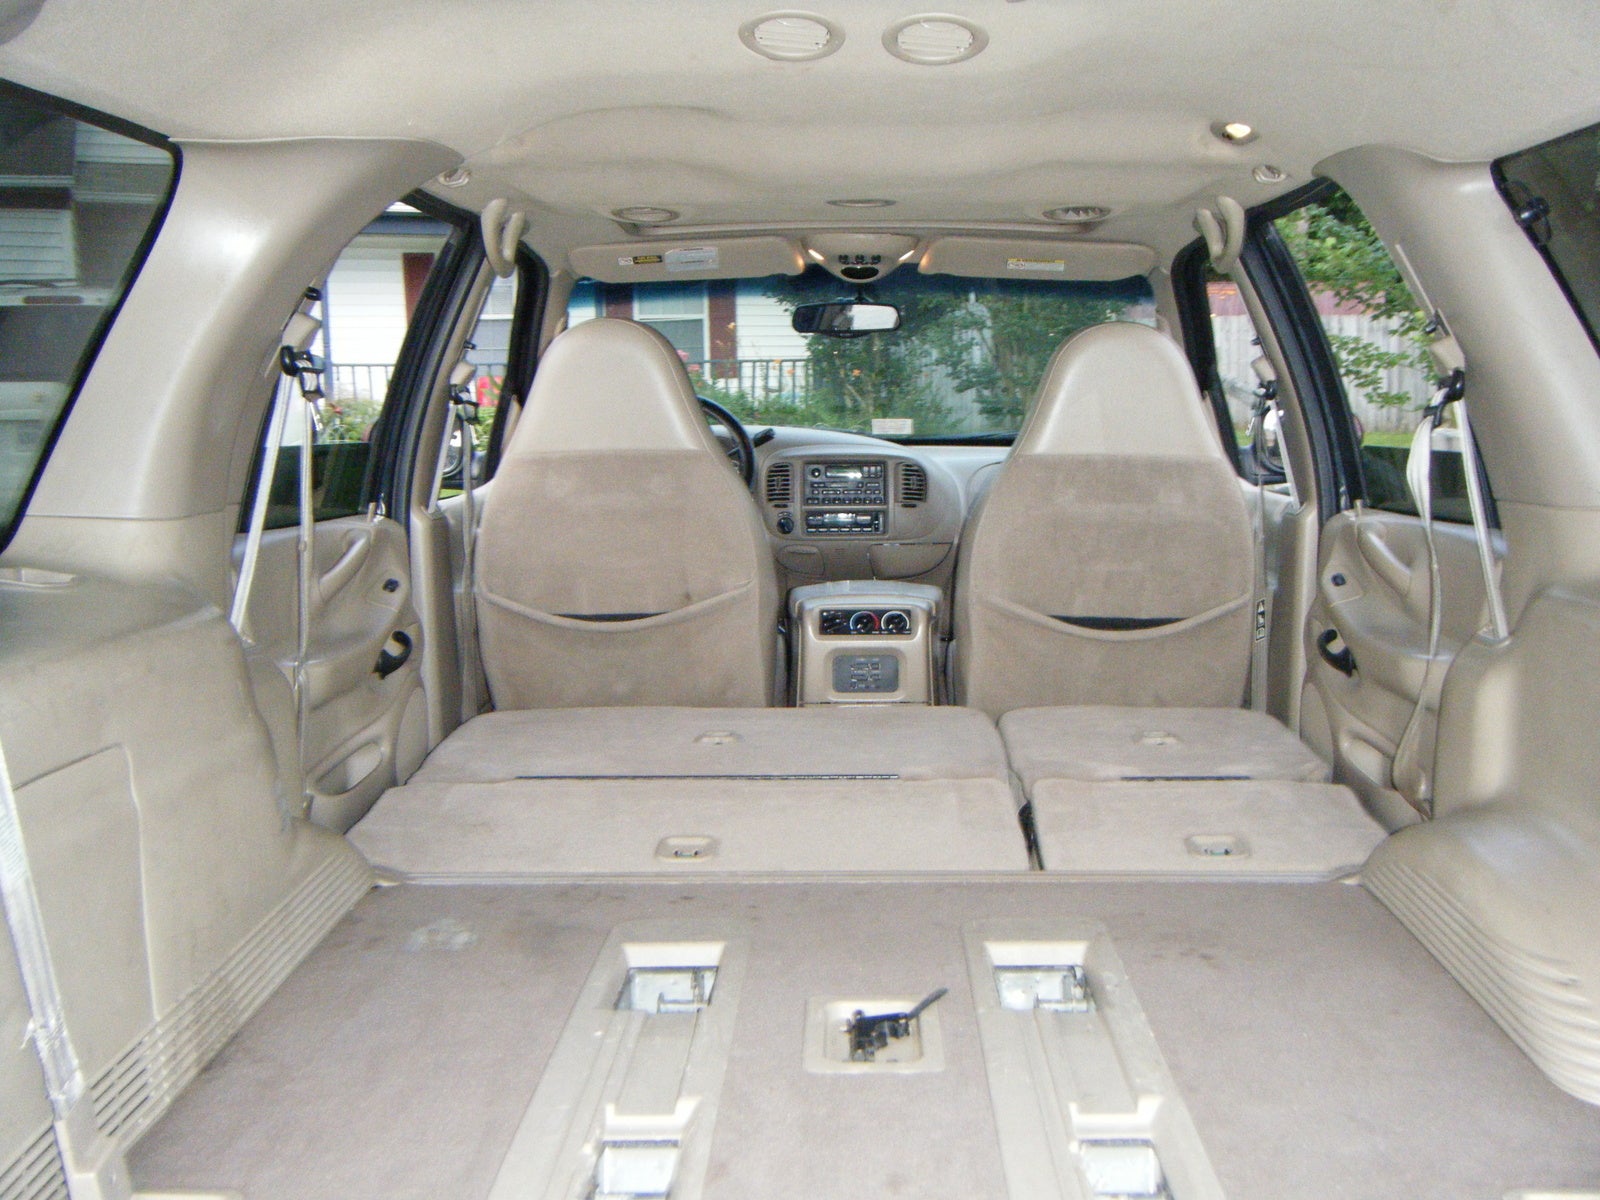 2000 Ford expedition interior #4